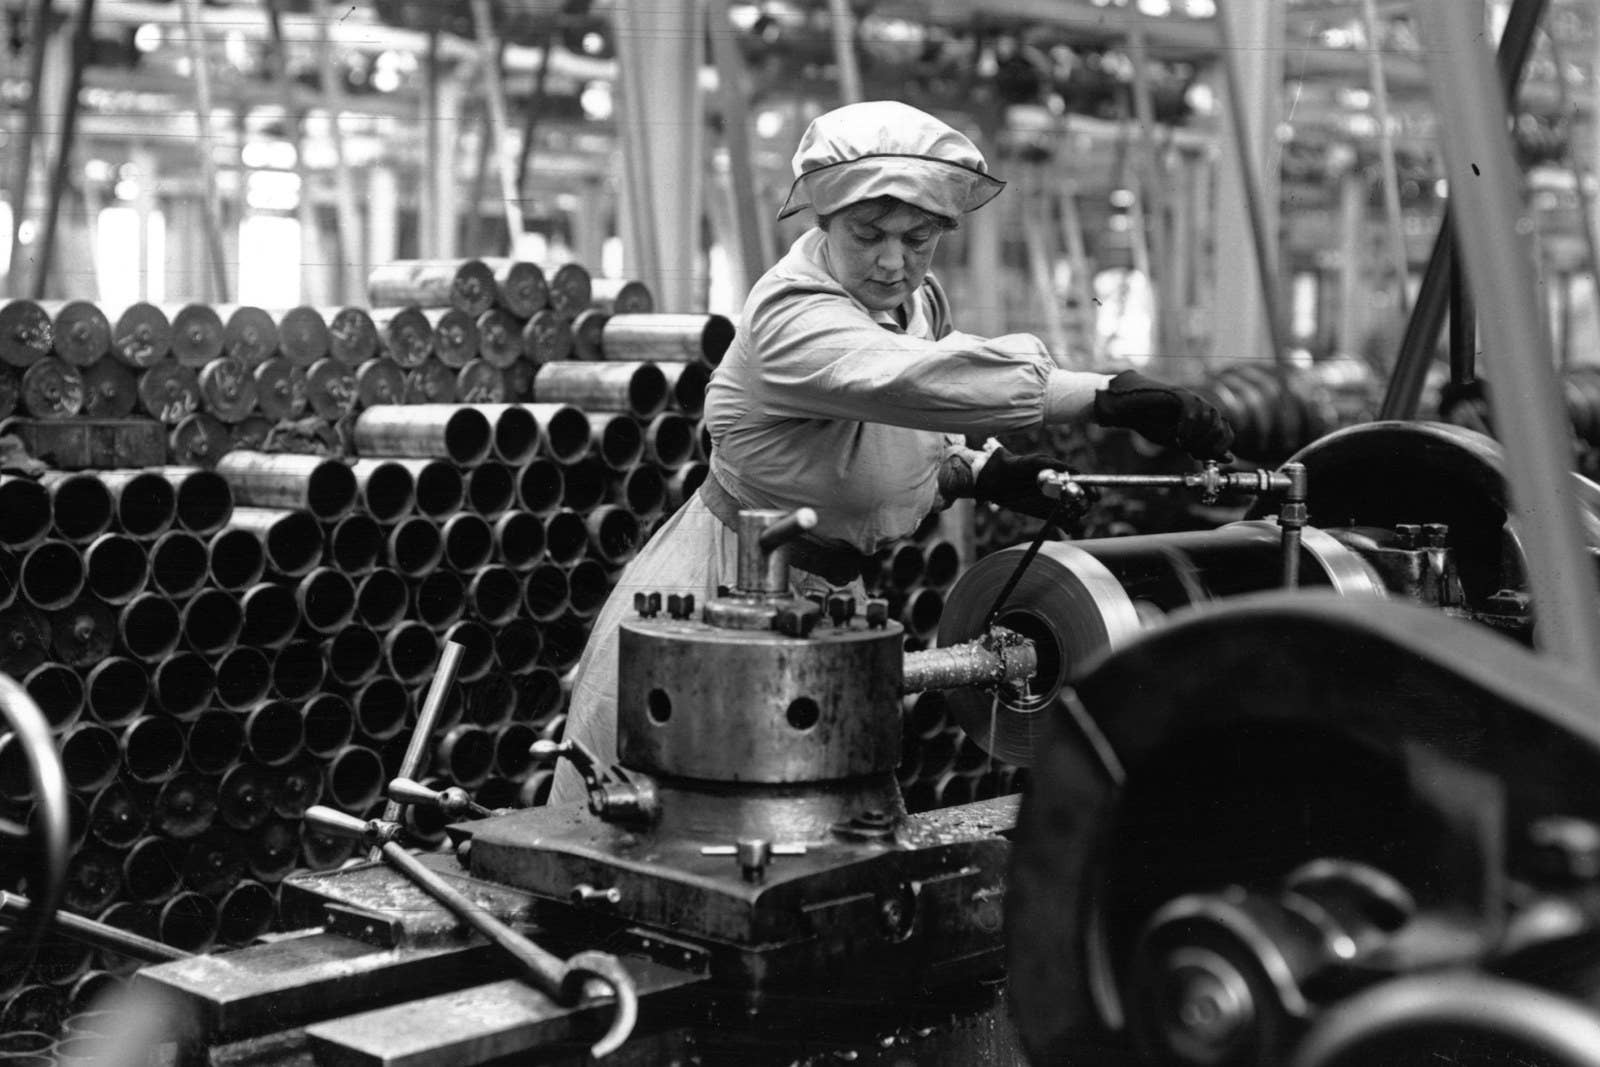 A munitions worker operating a machine in an armaments factory, circa 1915.